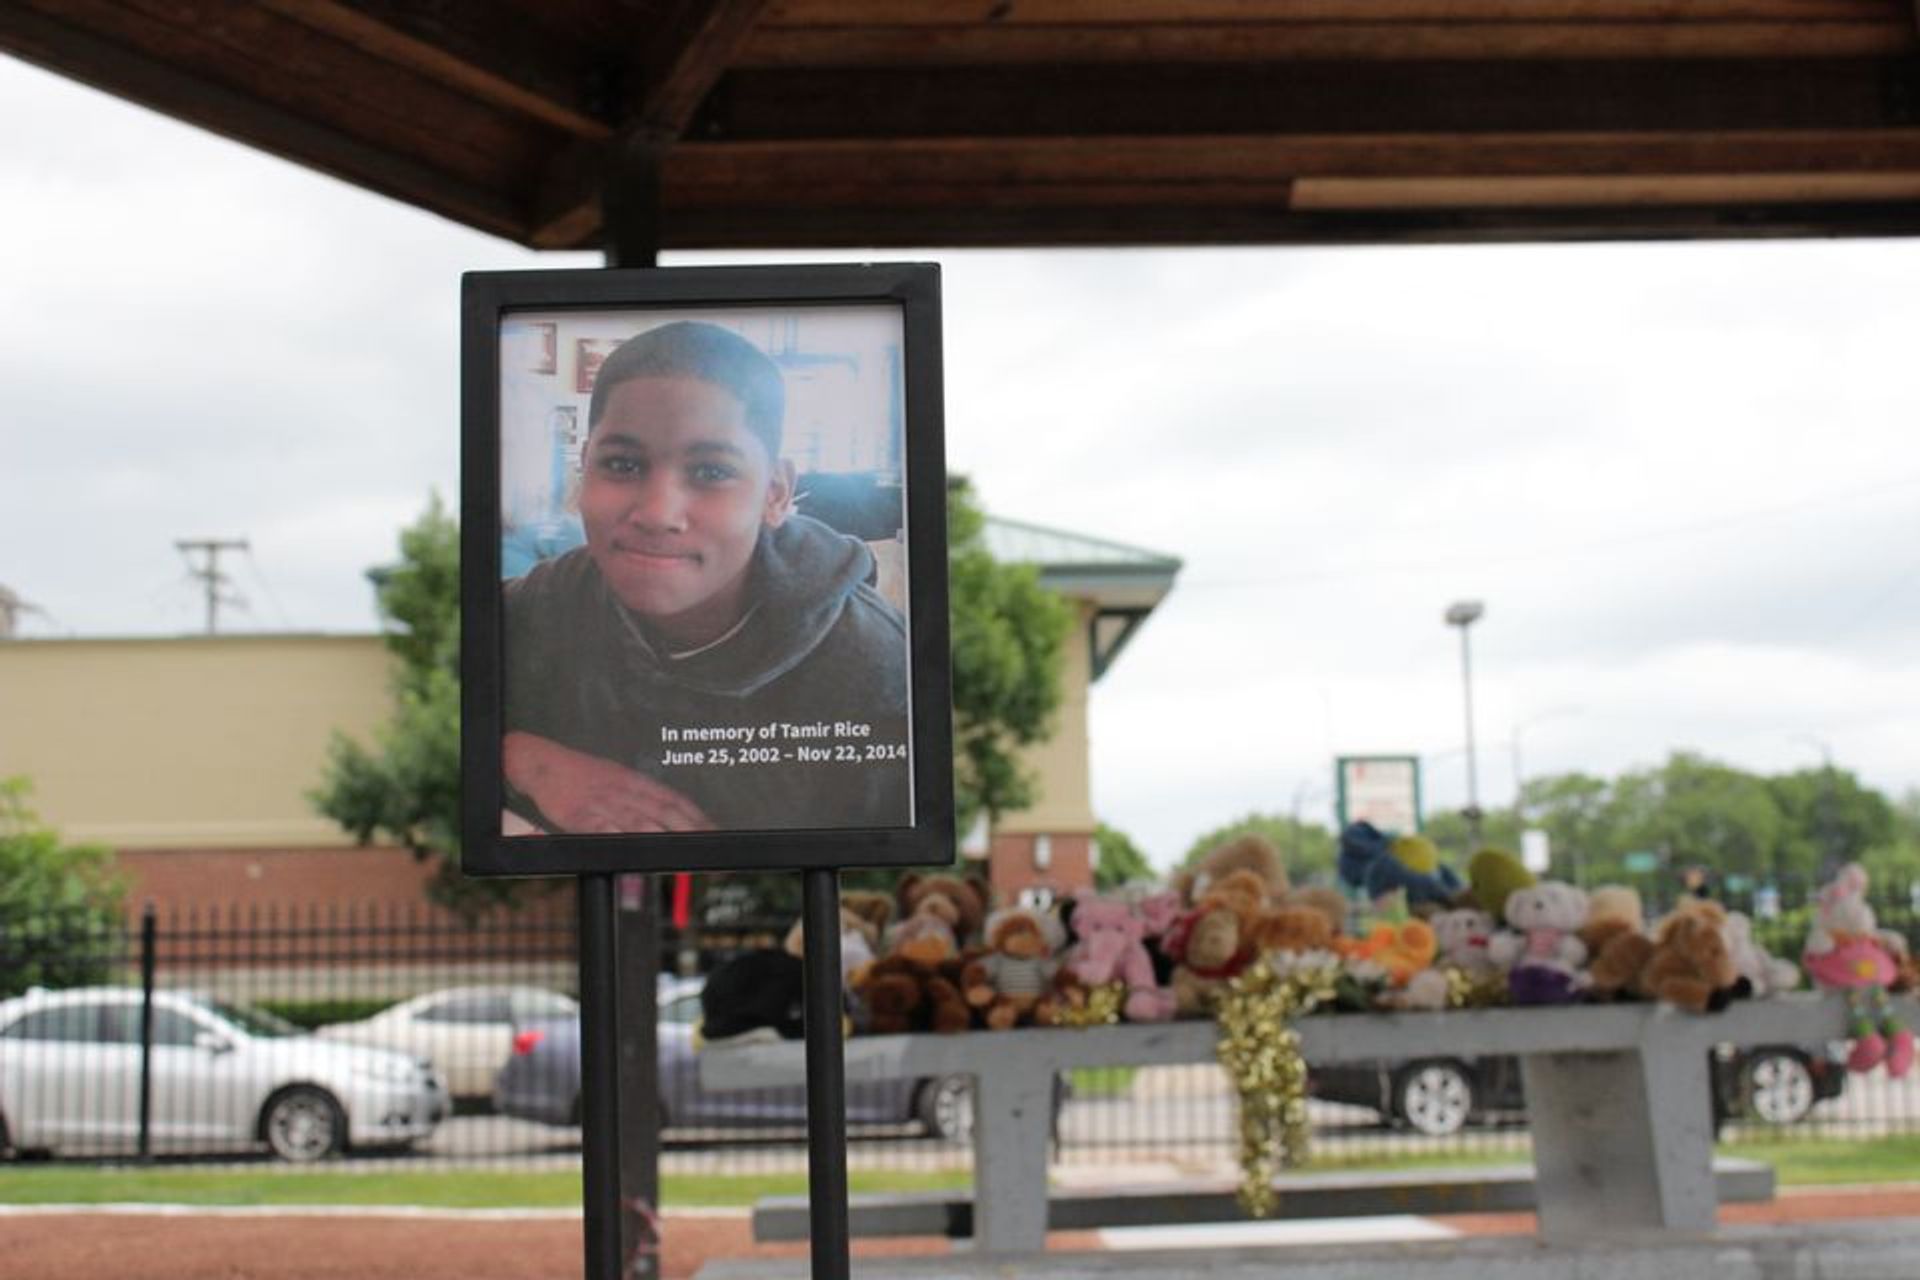 The newly rebuilt gazebo dedicated to the late Tamir Rice © Cleveland.com